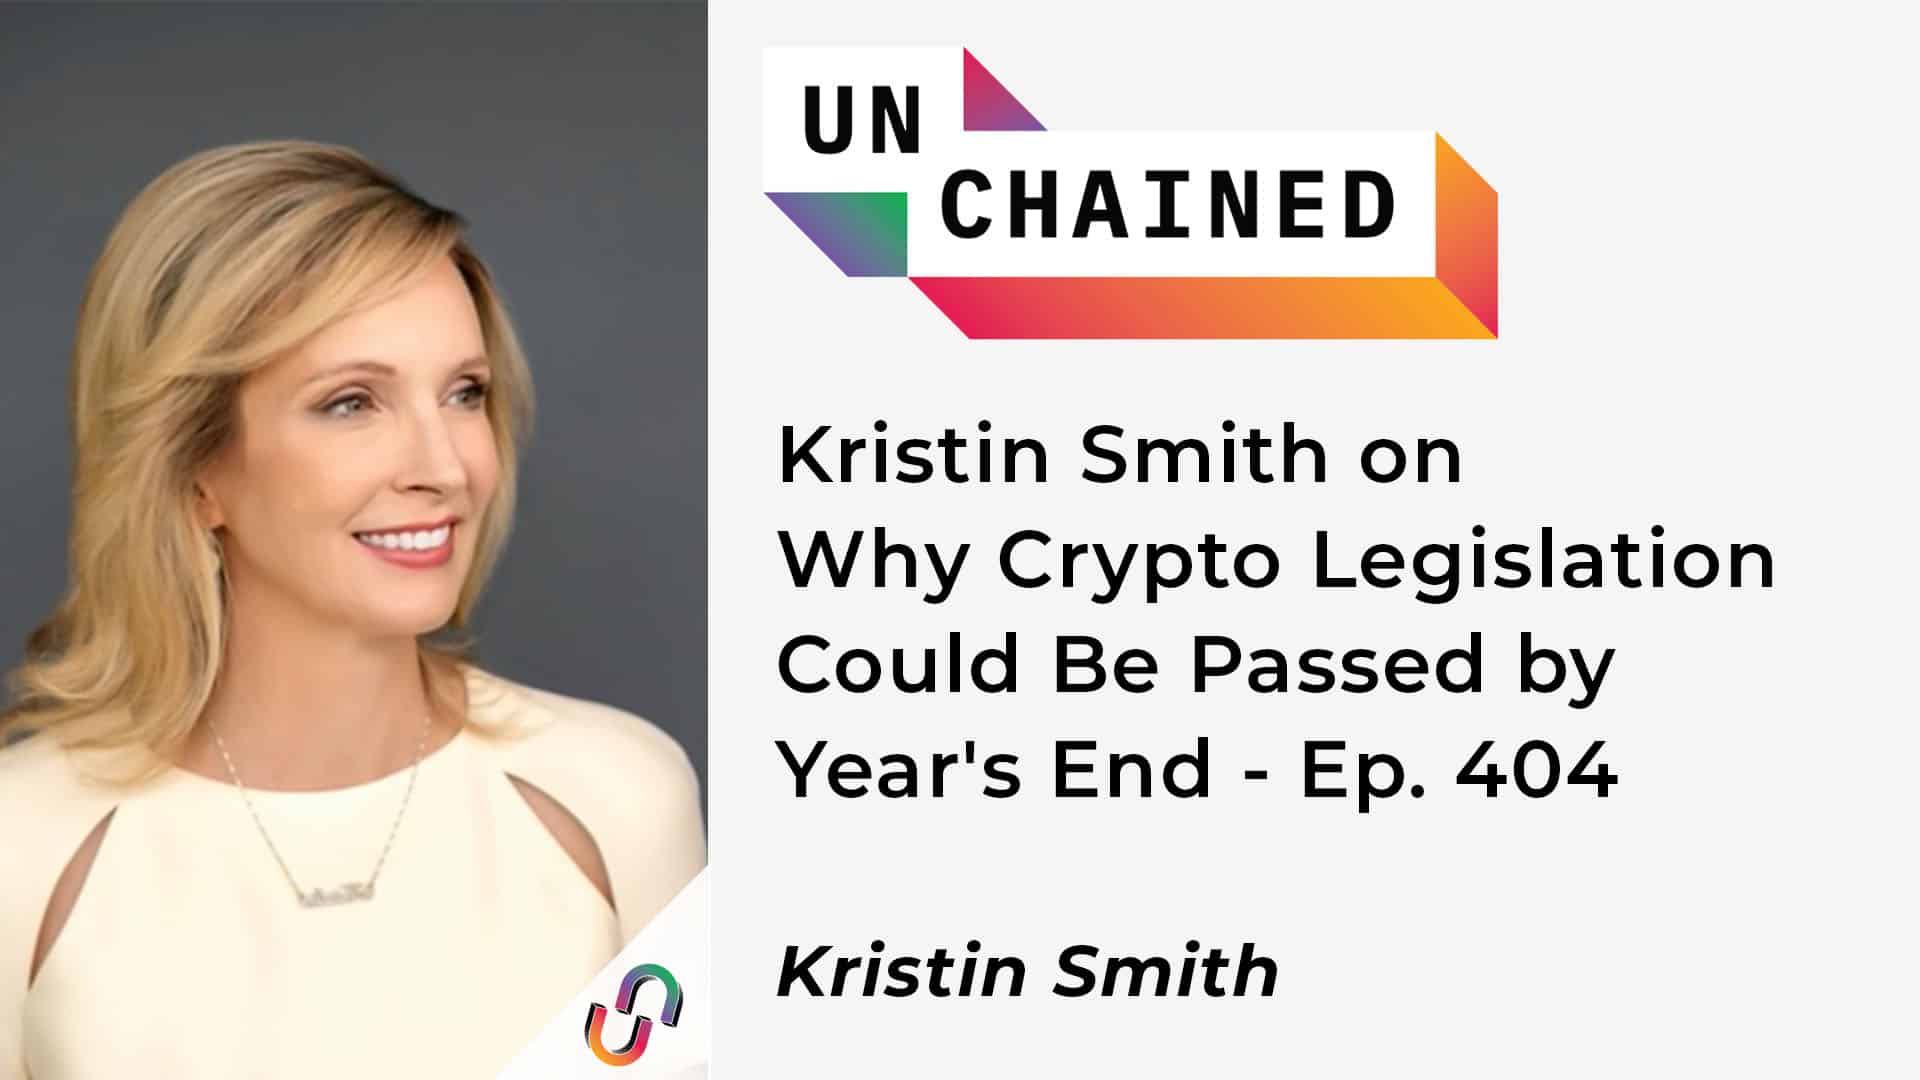 Kristin Smith on Why Crypto Legislation Could Be Passed by Year's End - Ep. 404